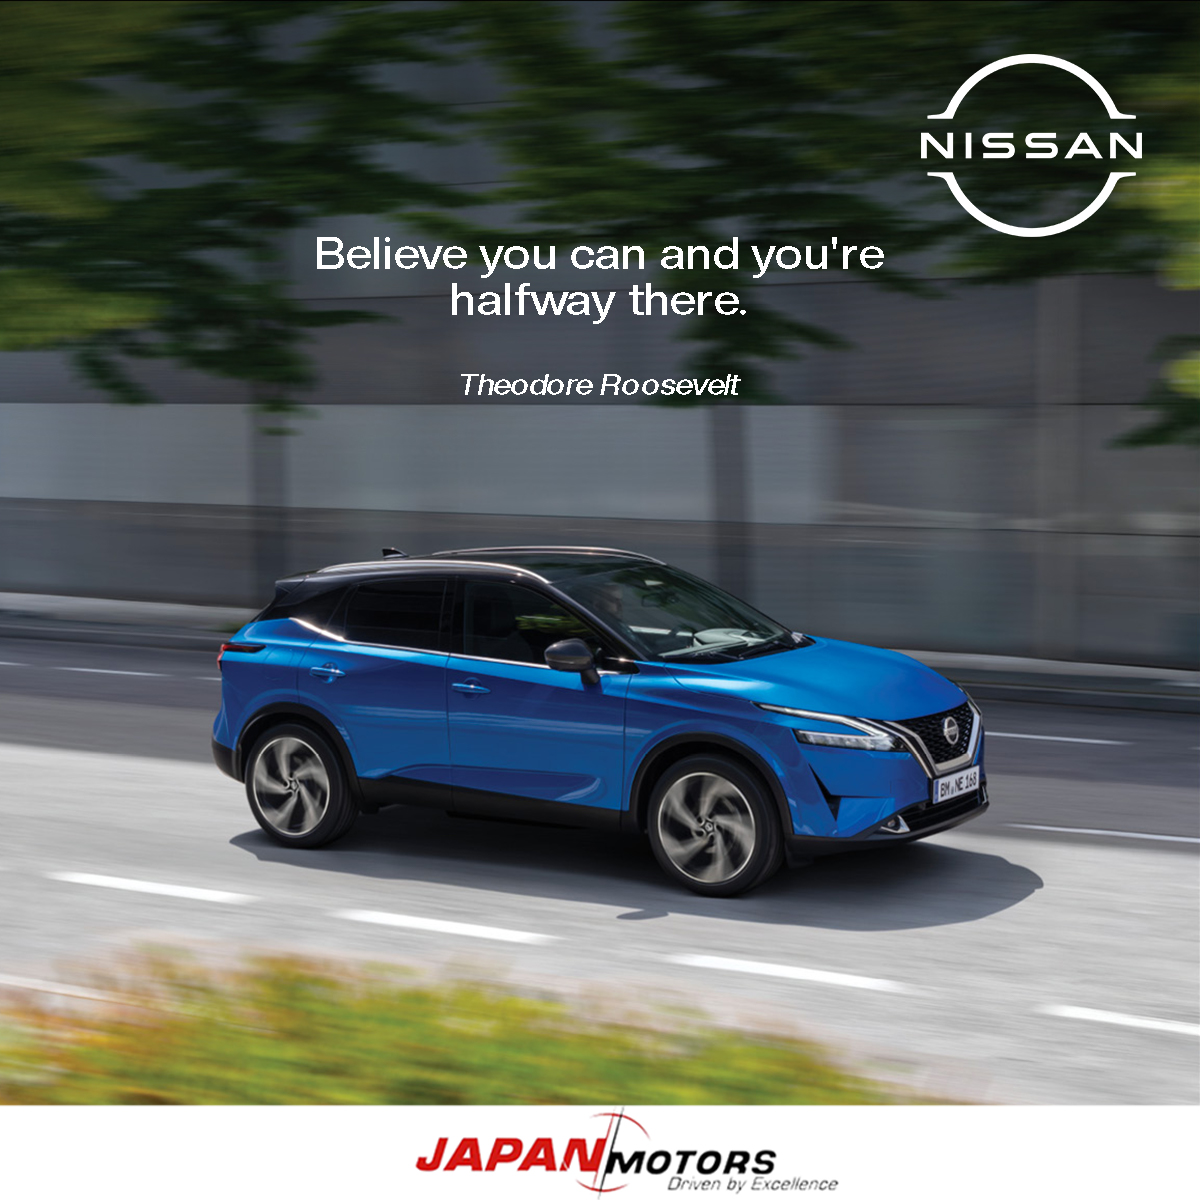 Motivation Monday: Believe you can and you're halfway there. - Theodore Roosevelt Book a test drive: nissanghana.com/en/shop-home/b… #MotivationalMonday #JapanMotors #NissanGhana #SolidarityForever #Nissan #NissanCares